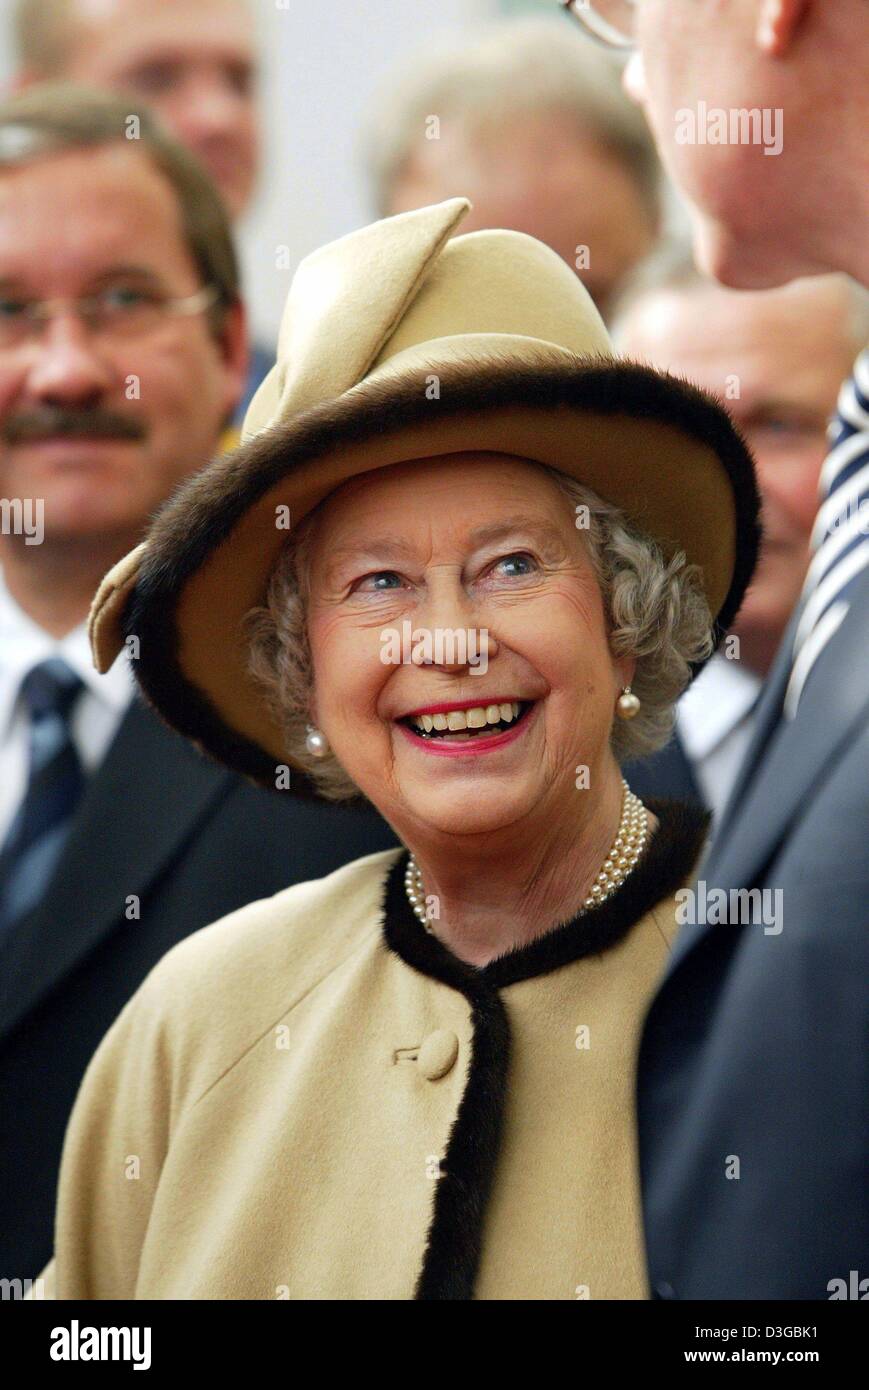 (dpa) - Her Majesty the Queen is in good spirits as she arrives at the North Rhine Westphalian parliament in Duesseldorf, Germany, 4 November 2004. After visits to the German states of Berlin and Brandenburg the Queen and her husband Prince Philip of Edinburgh have arrived in North Rhine Westphalia. Among the scheduled stops will be the parliament, the children's hospital of Duesse Stock Photo